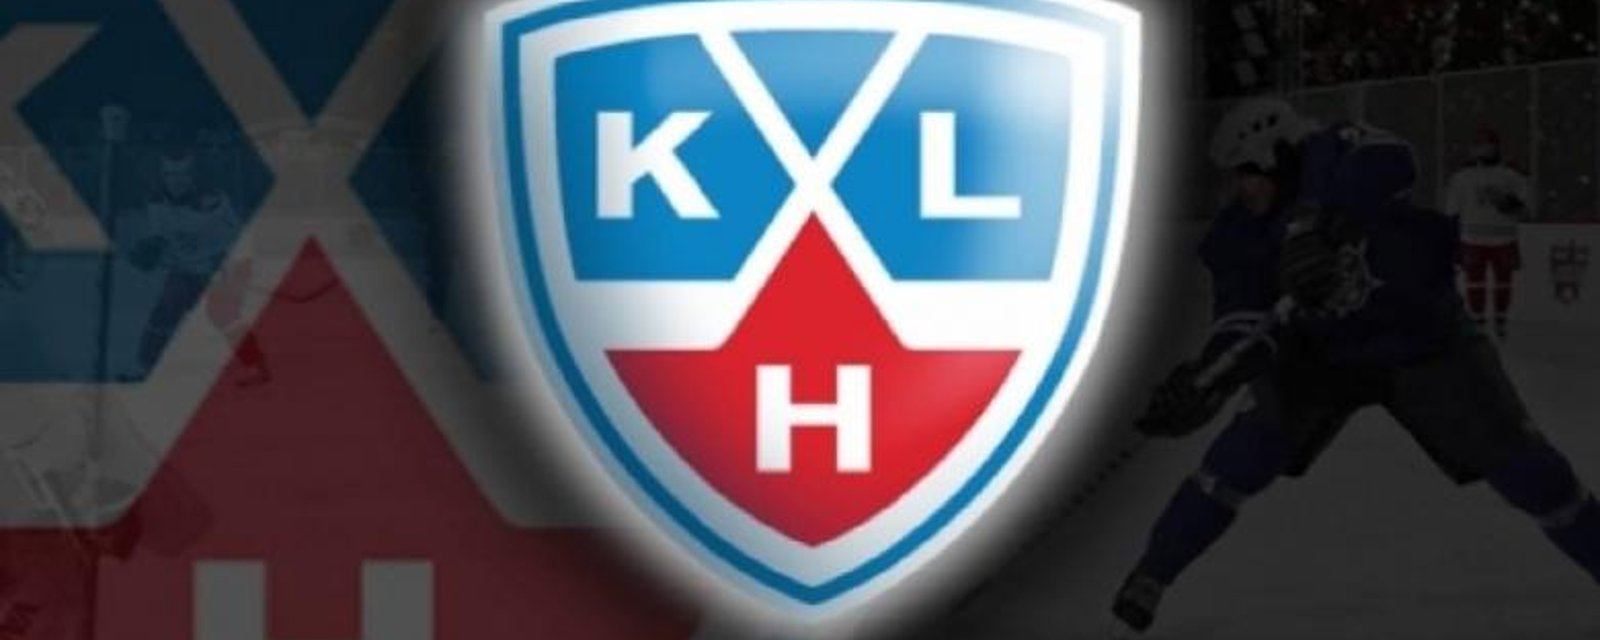 Breaking: KHL reportedly expanding to major Eruopean city.